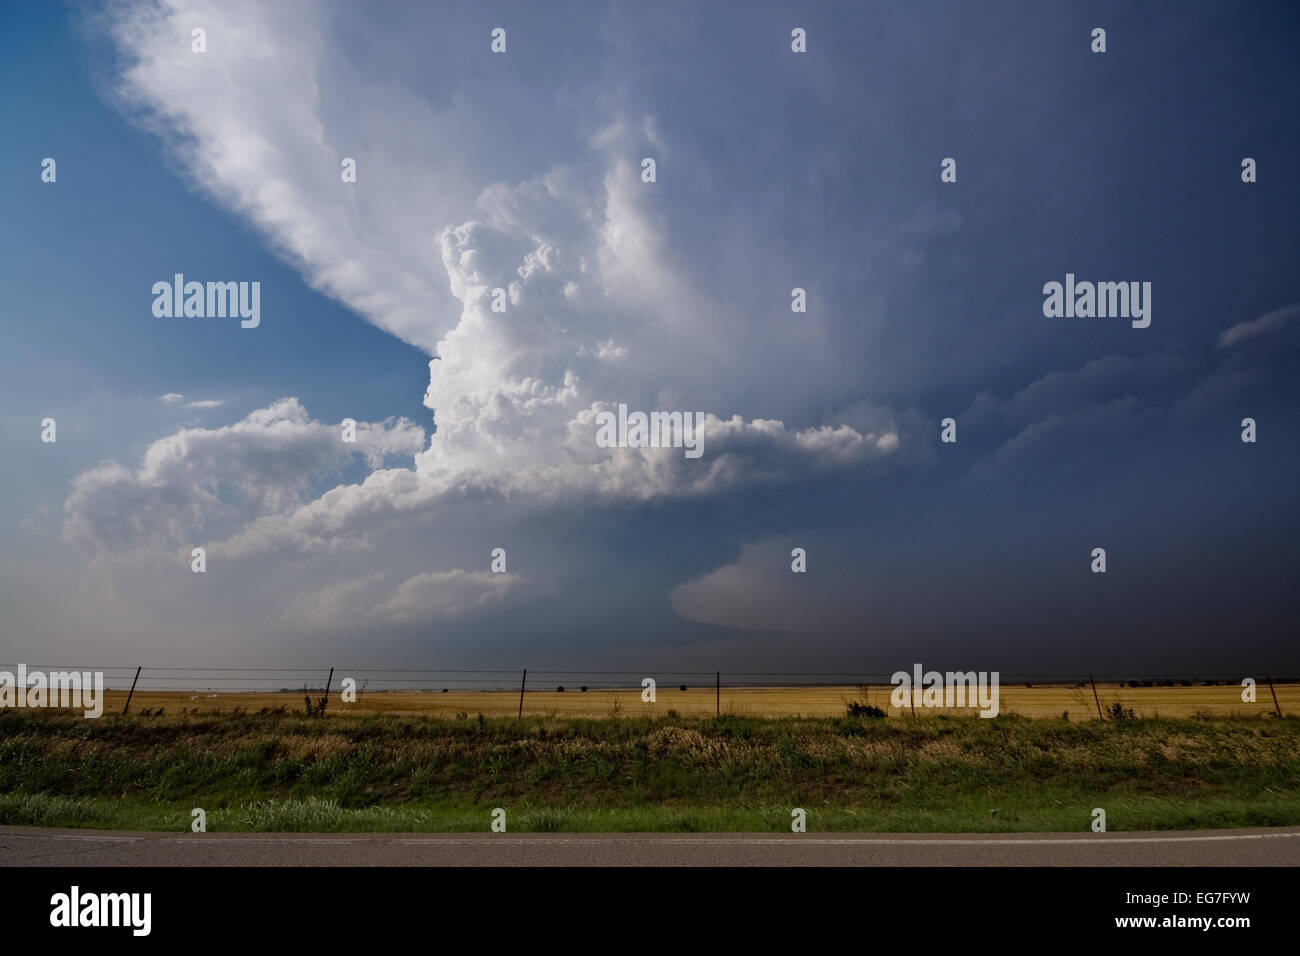 A powerful supercell thunderstorm takes shapes with a twisting updraft threatening to produce tornadoes Stock Photo